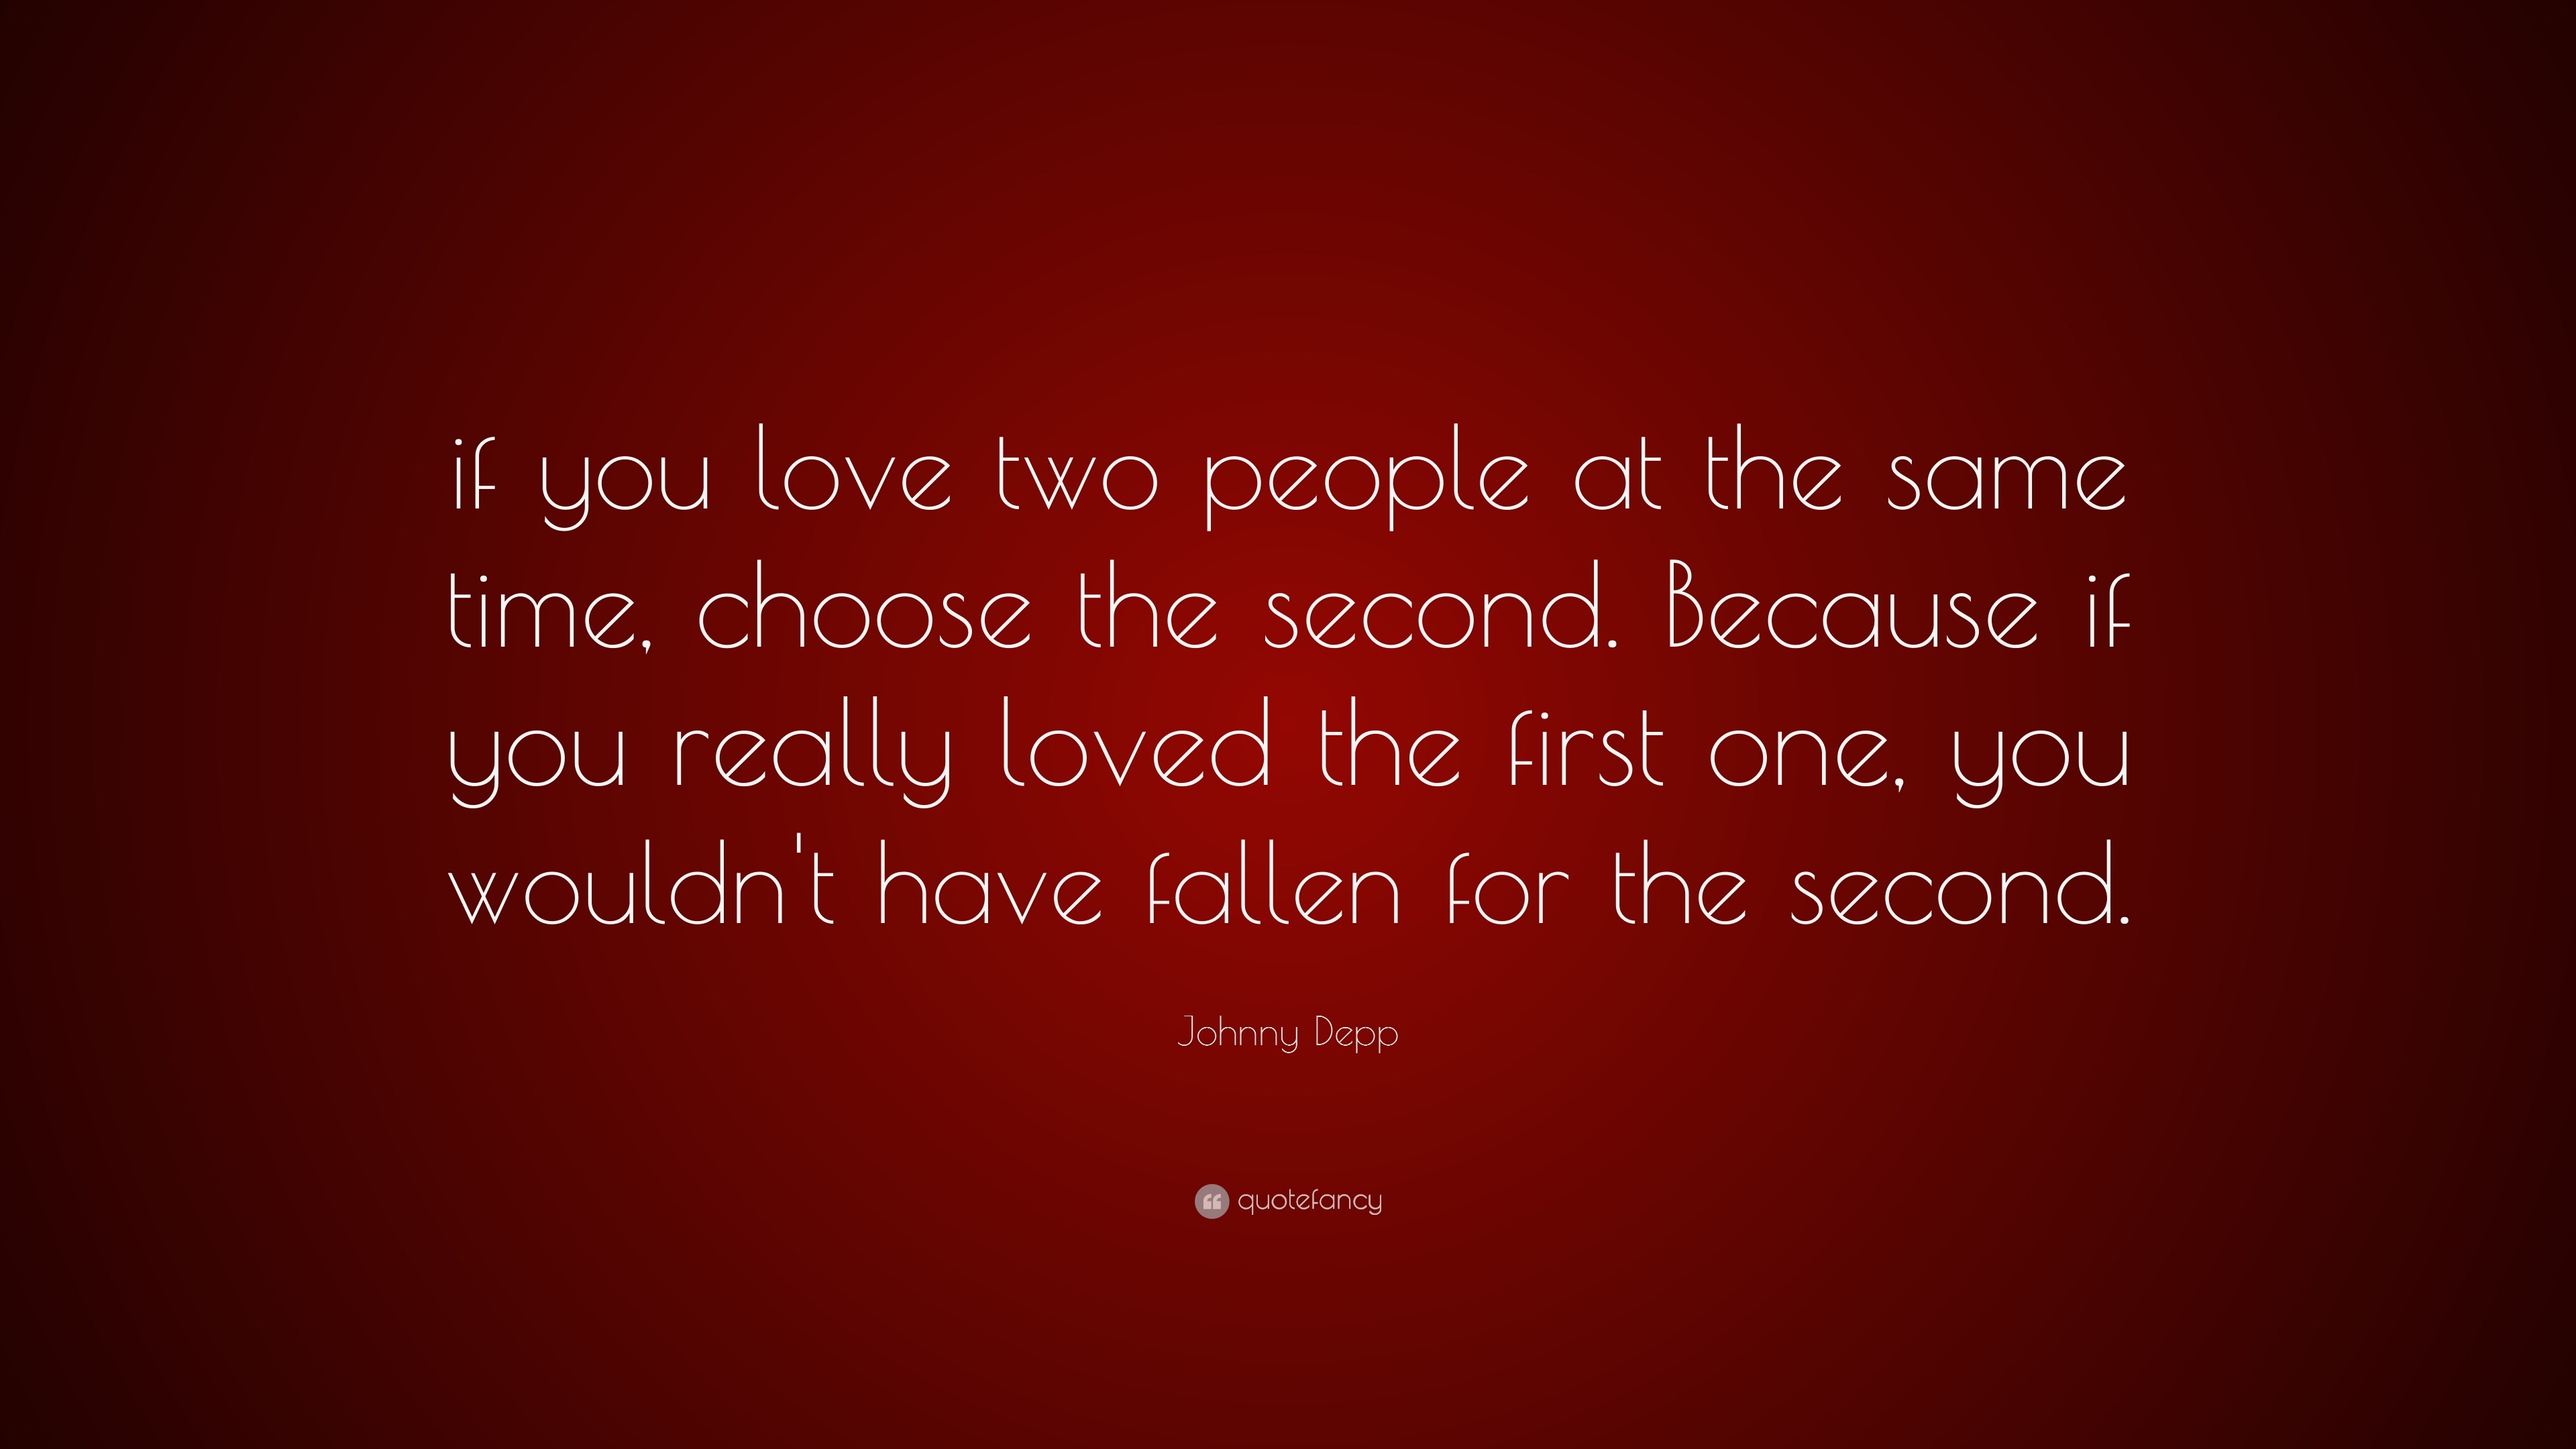 Johnny Depp Quote “if You Love Two People At The Same Time Choose The Second Because If You